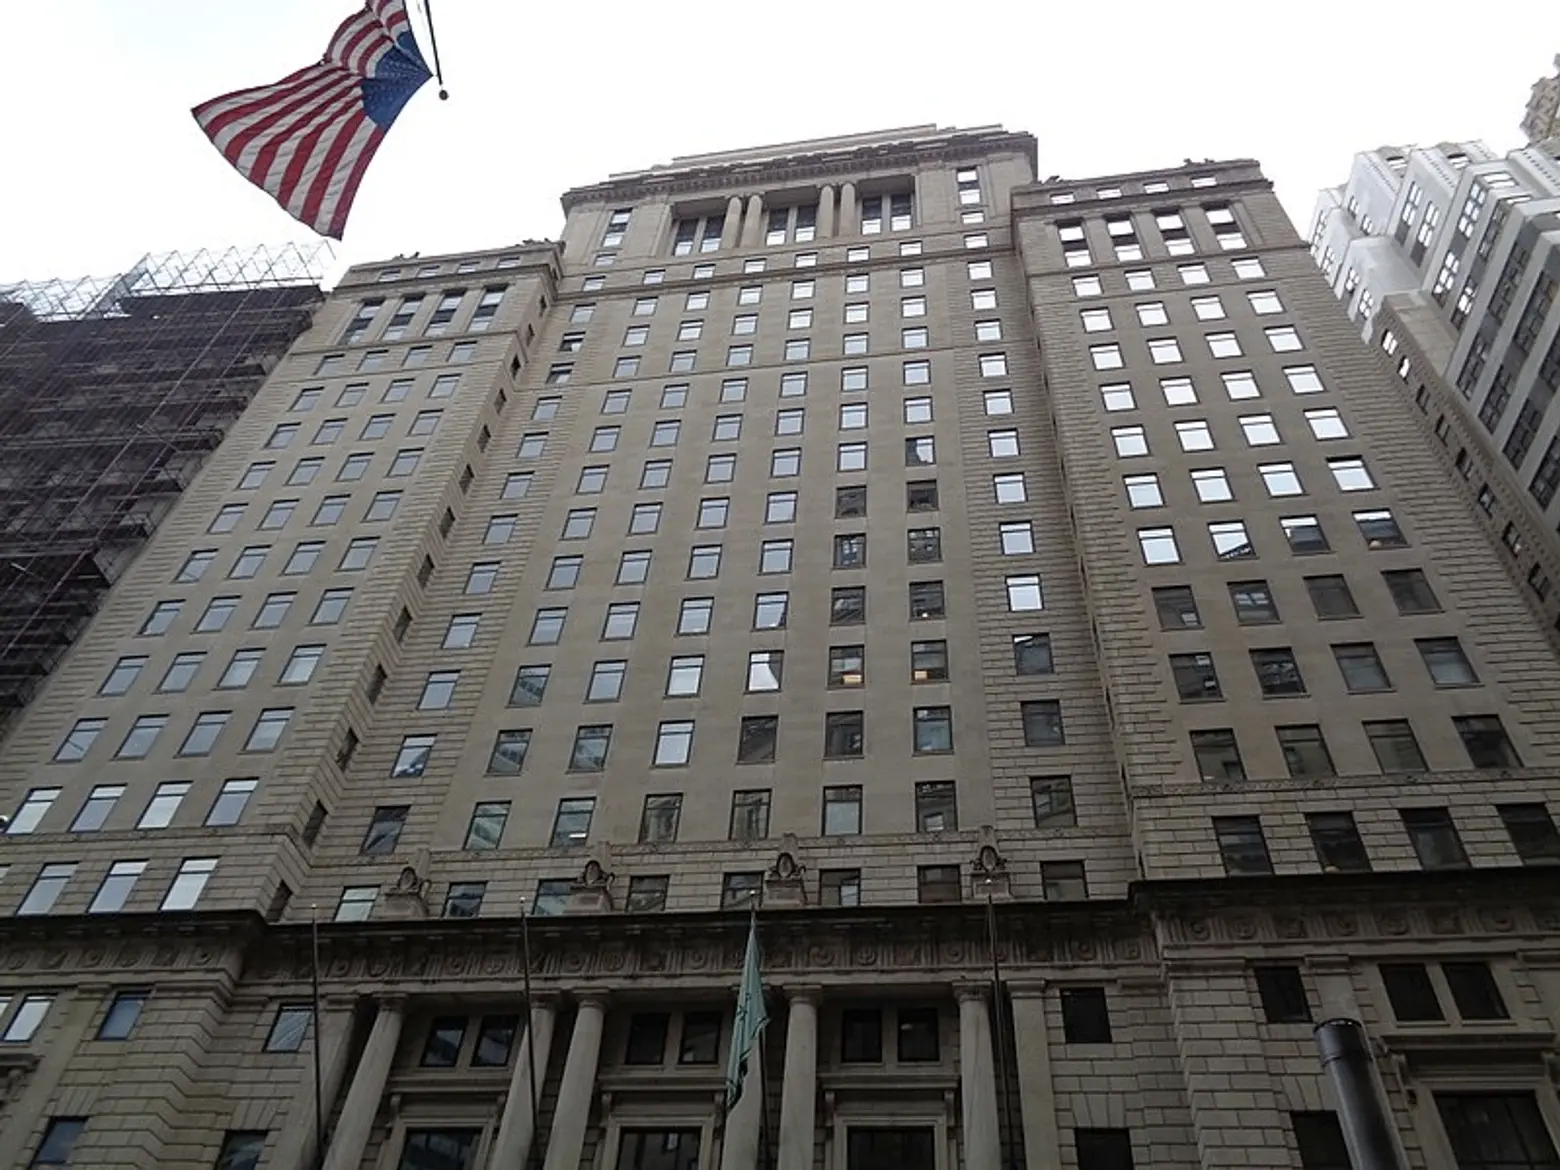 cunard building, standard and poor building, 25 broadway, history 